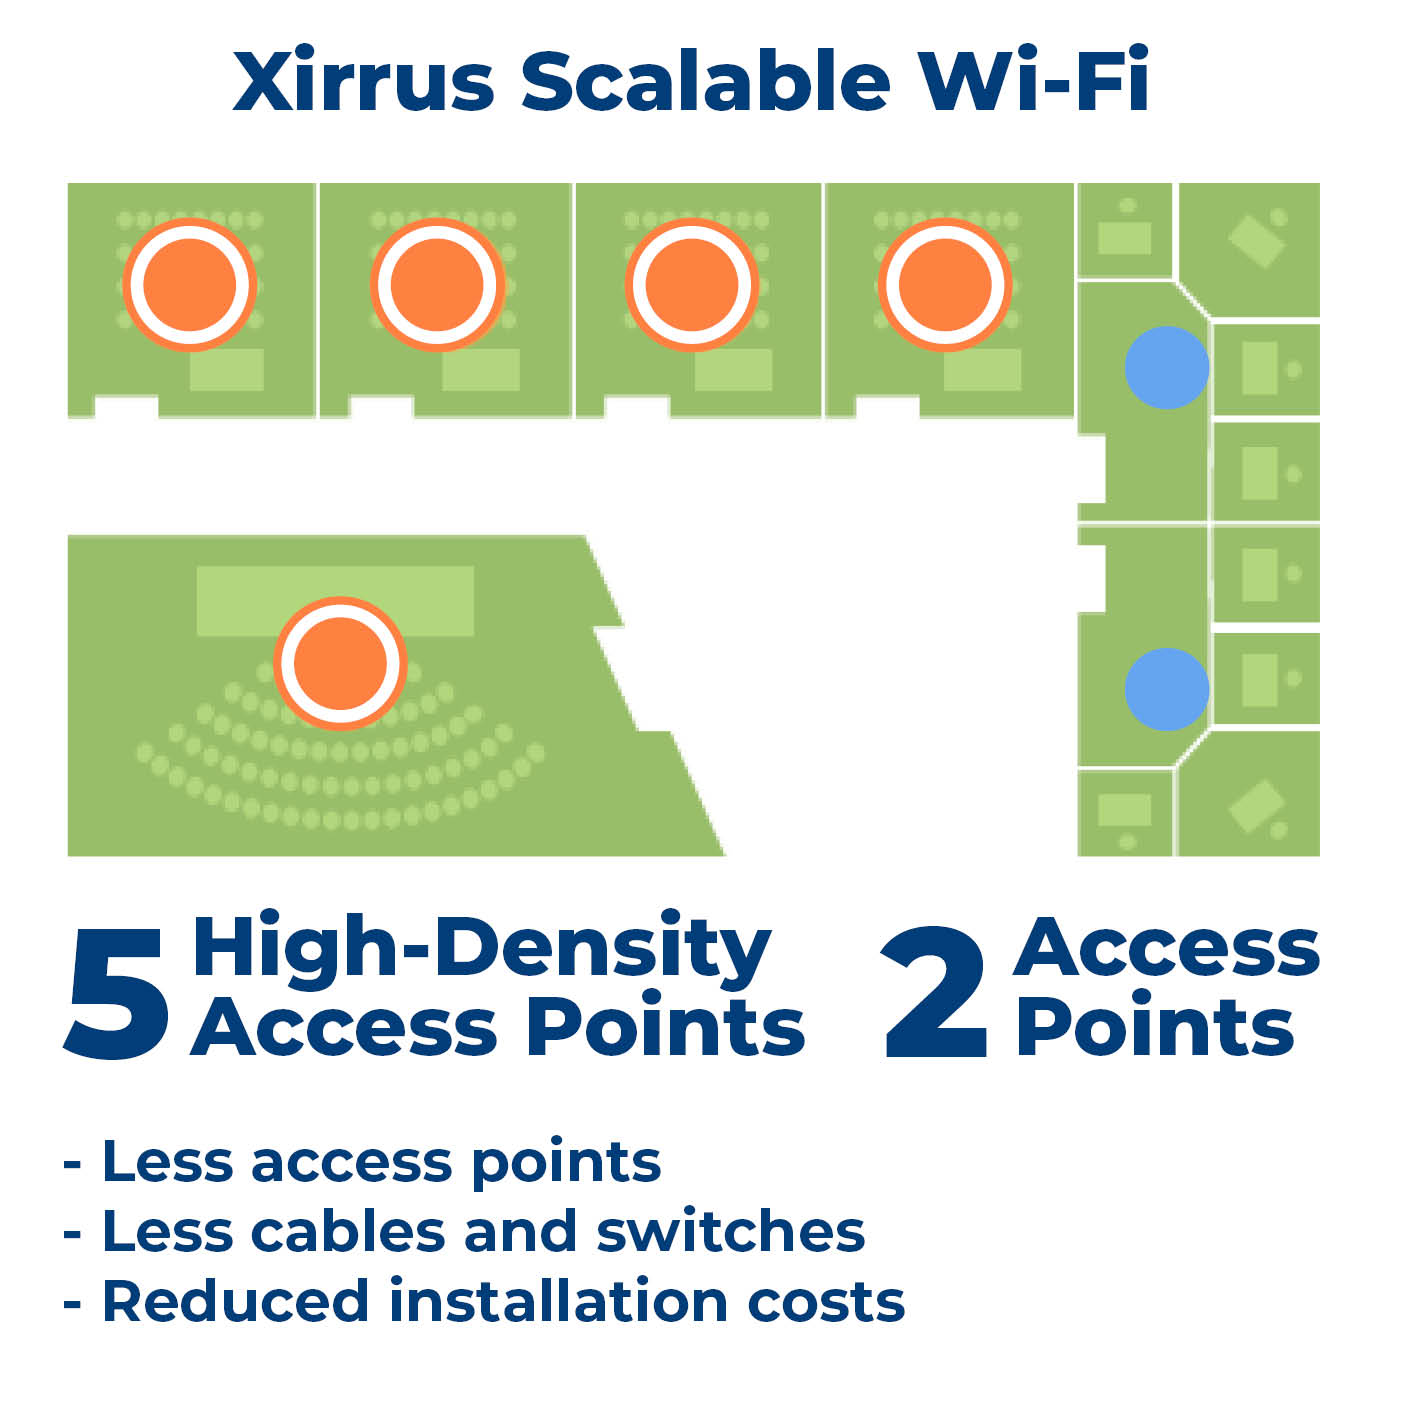 Cambium Networks Xirrus Access Points - The Scalable Solution